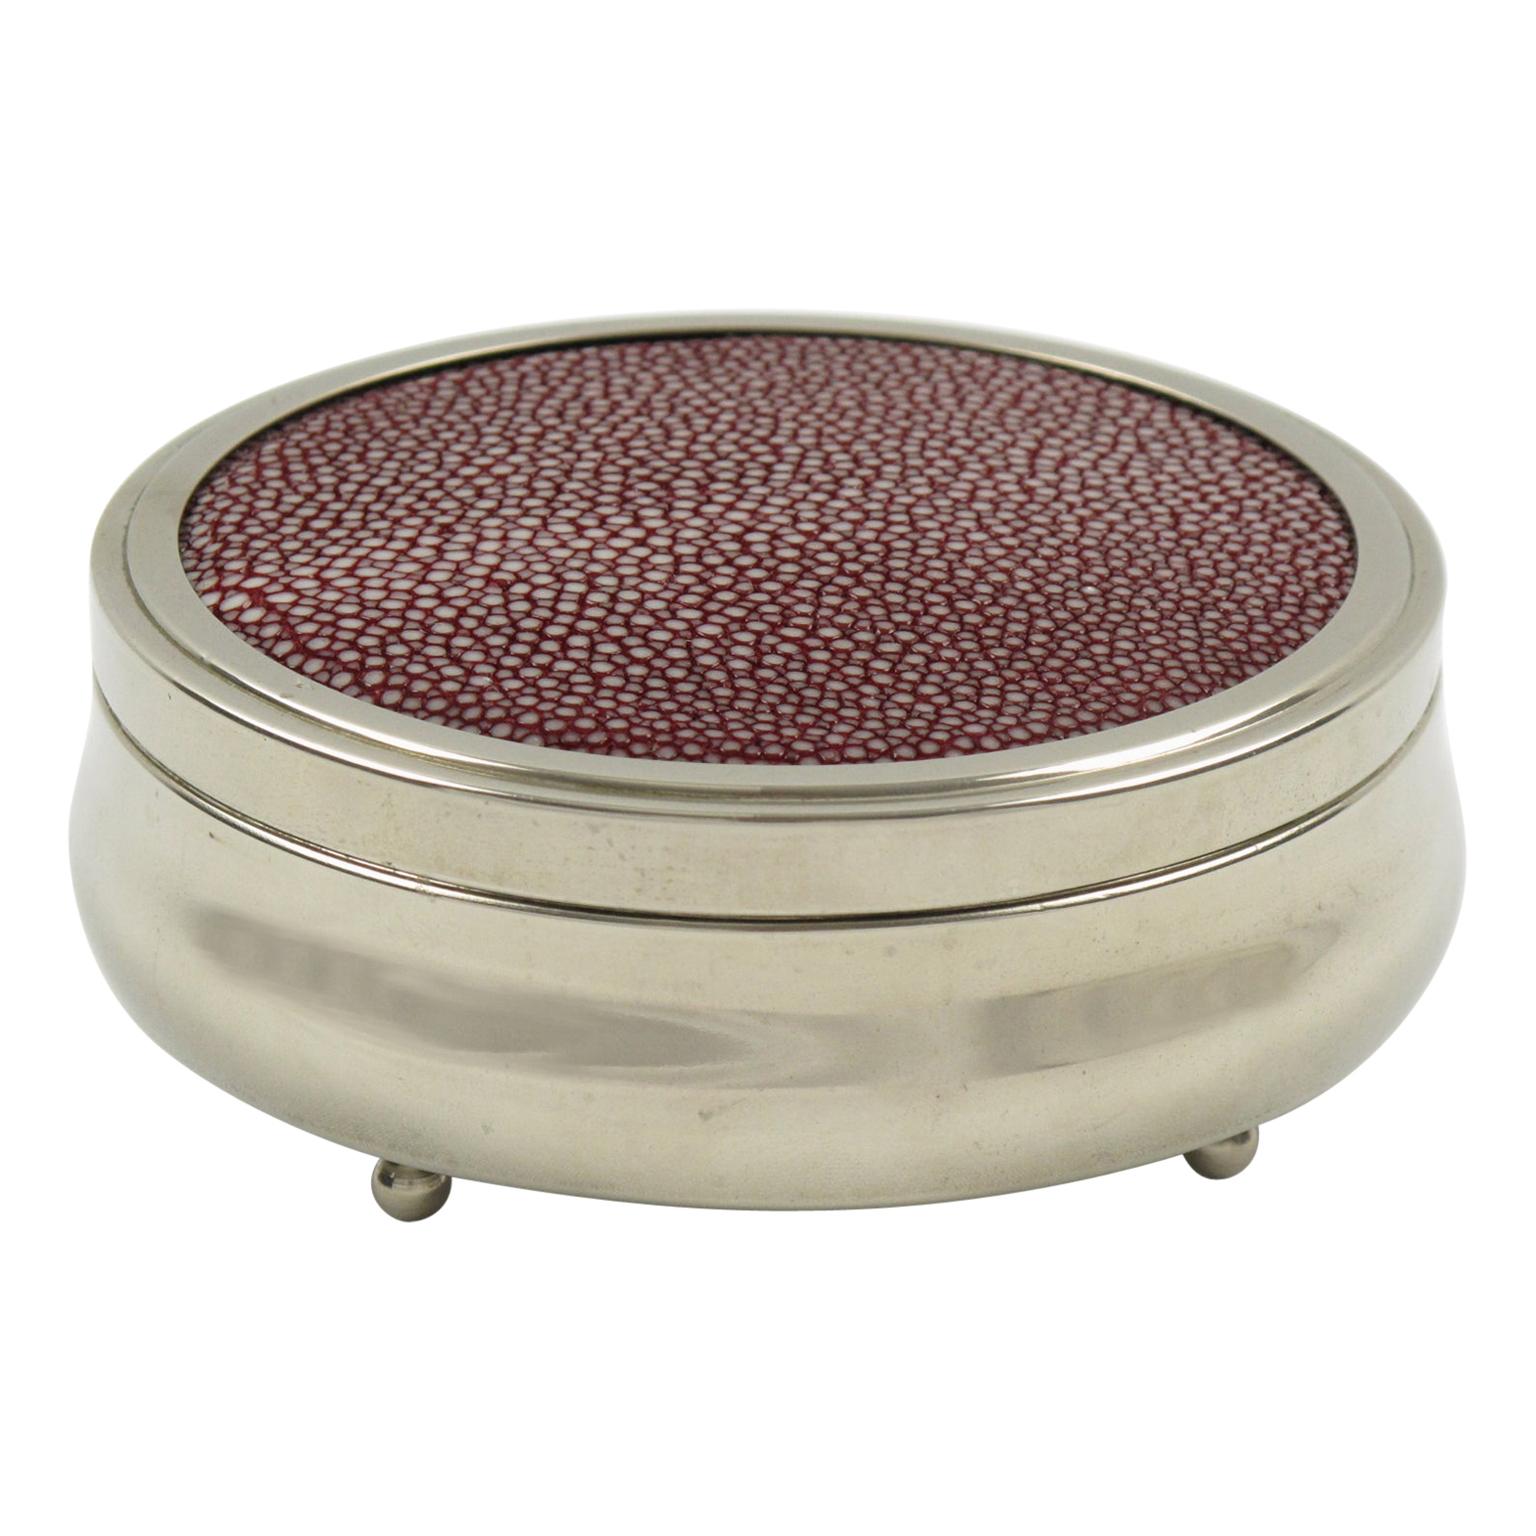 Art Deco Covered Round Box Chrome and Red Shagreen